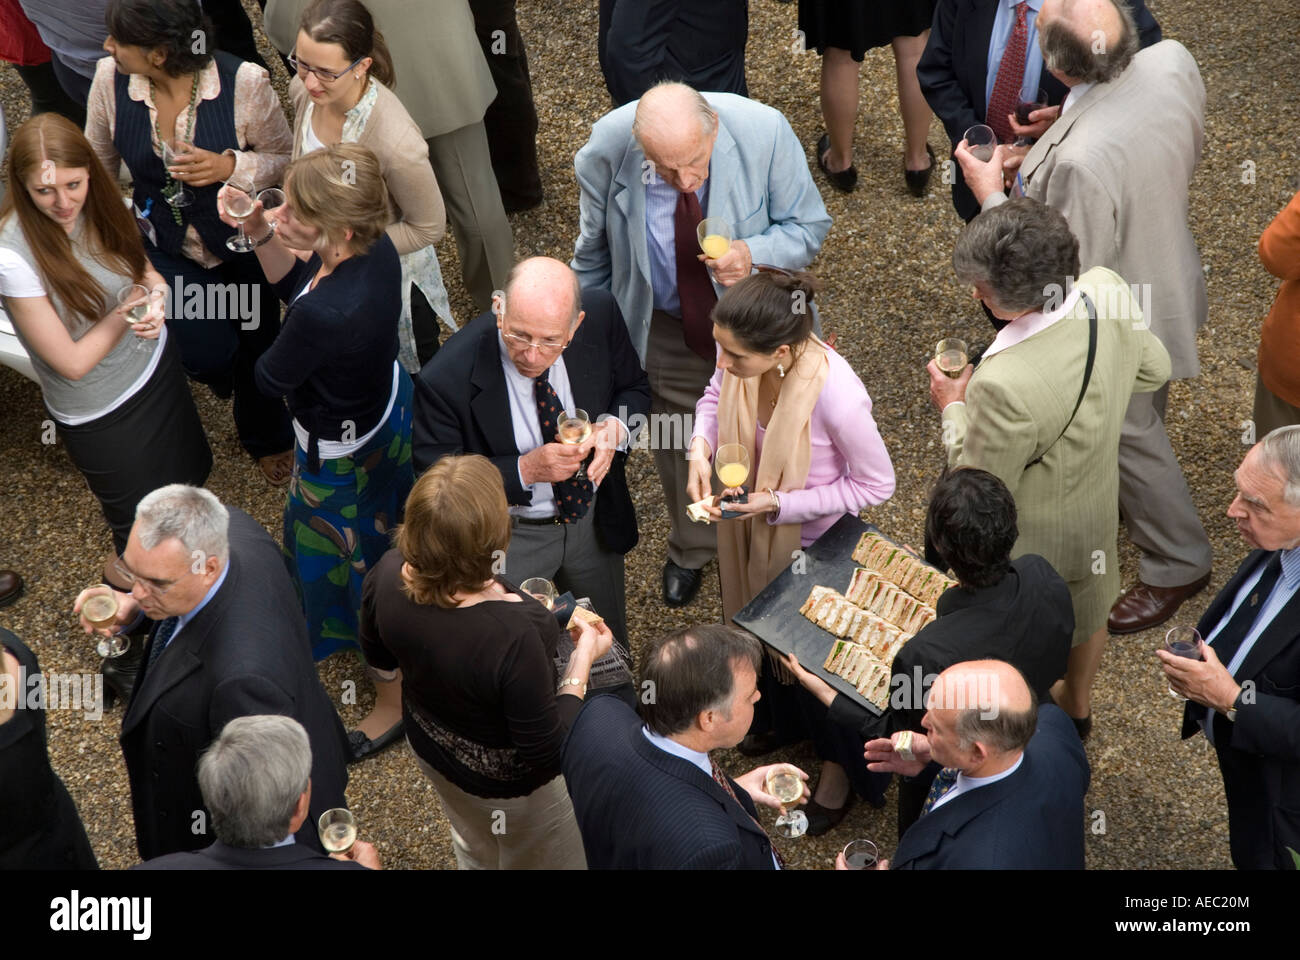 English people drinking and socialising at society event London England UK Stock Photo